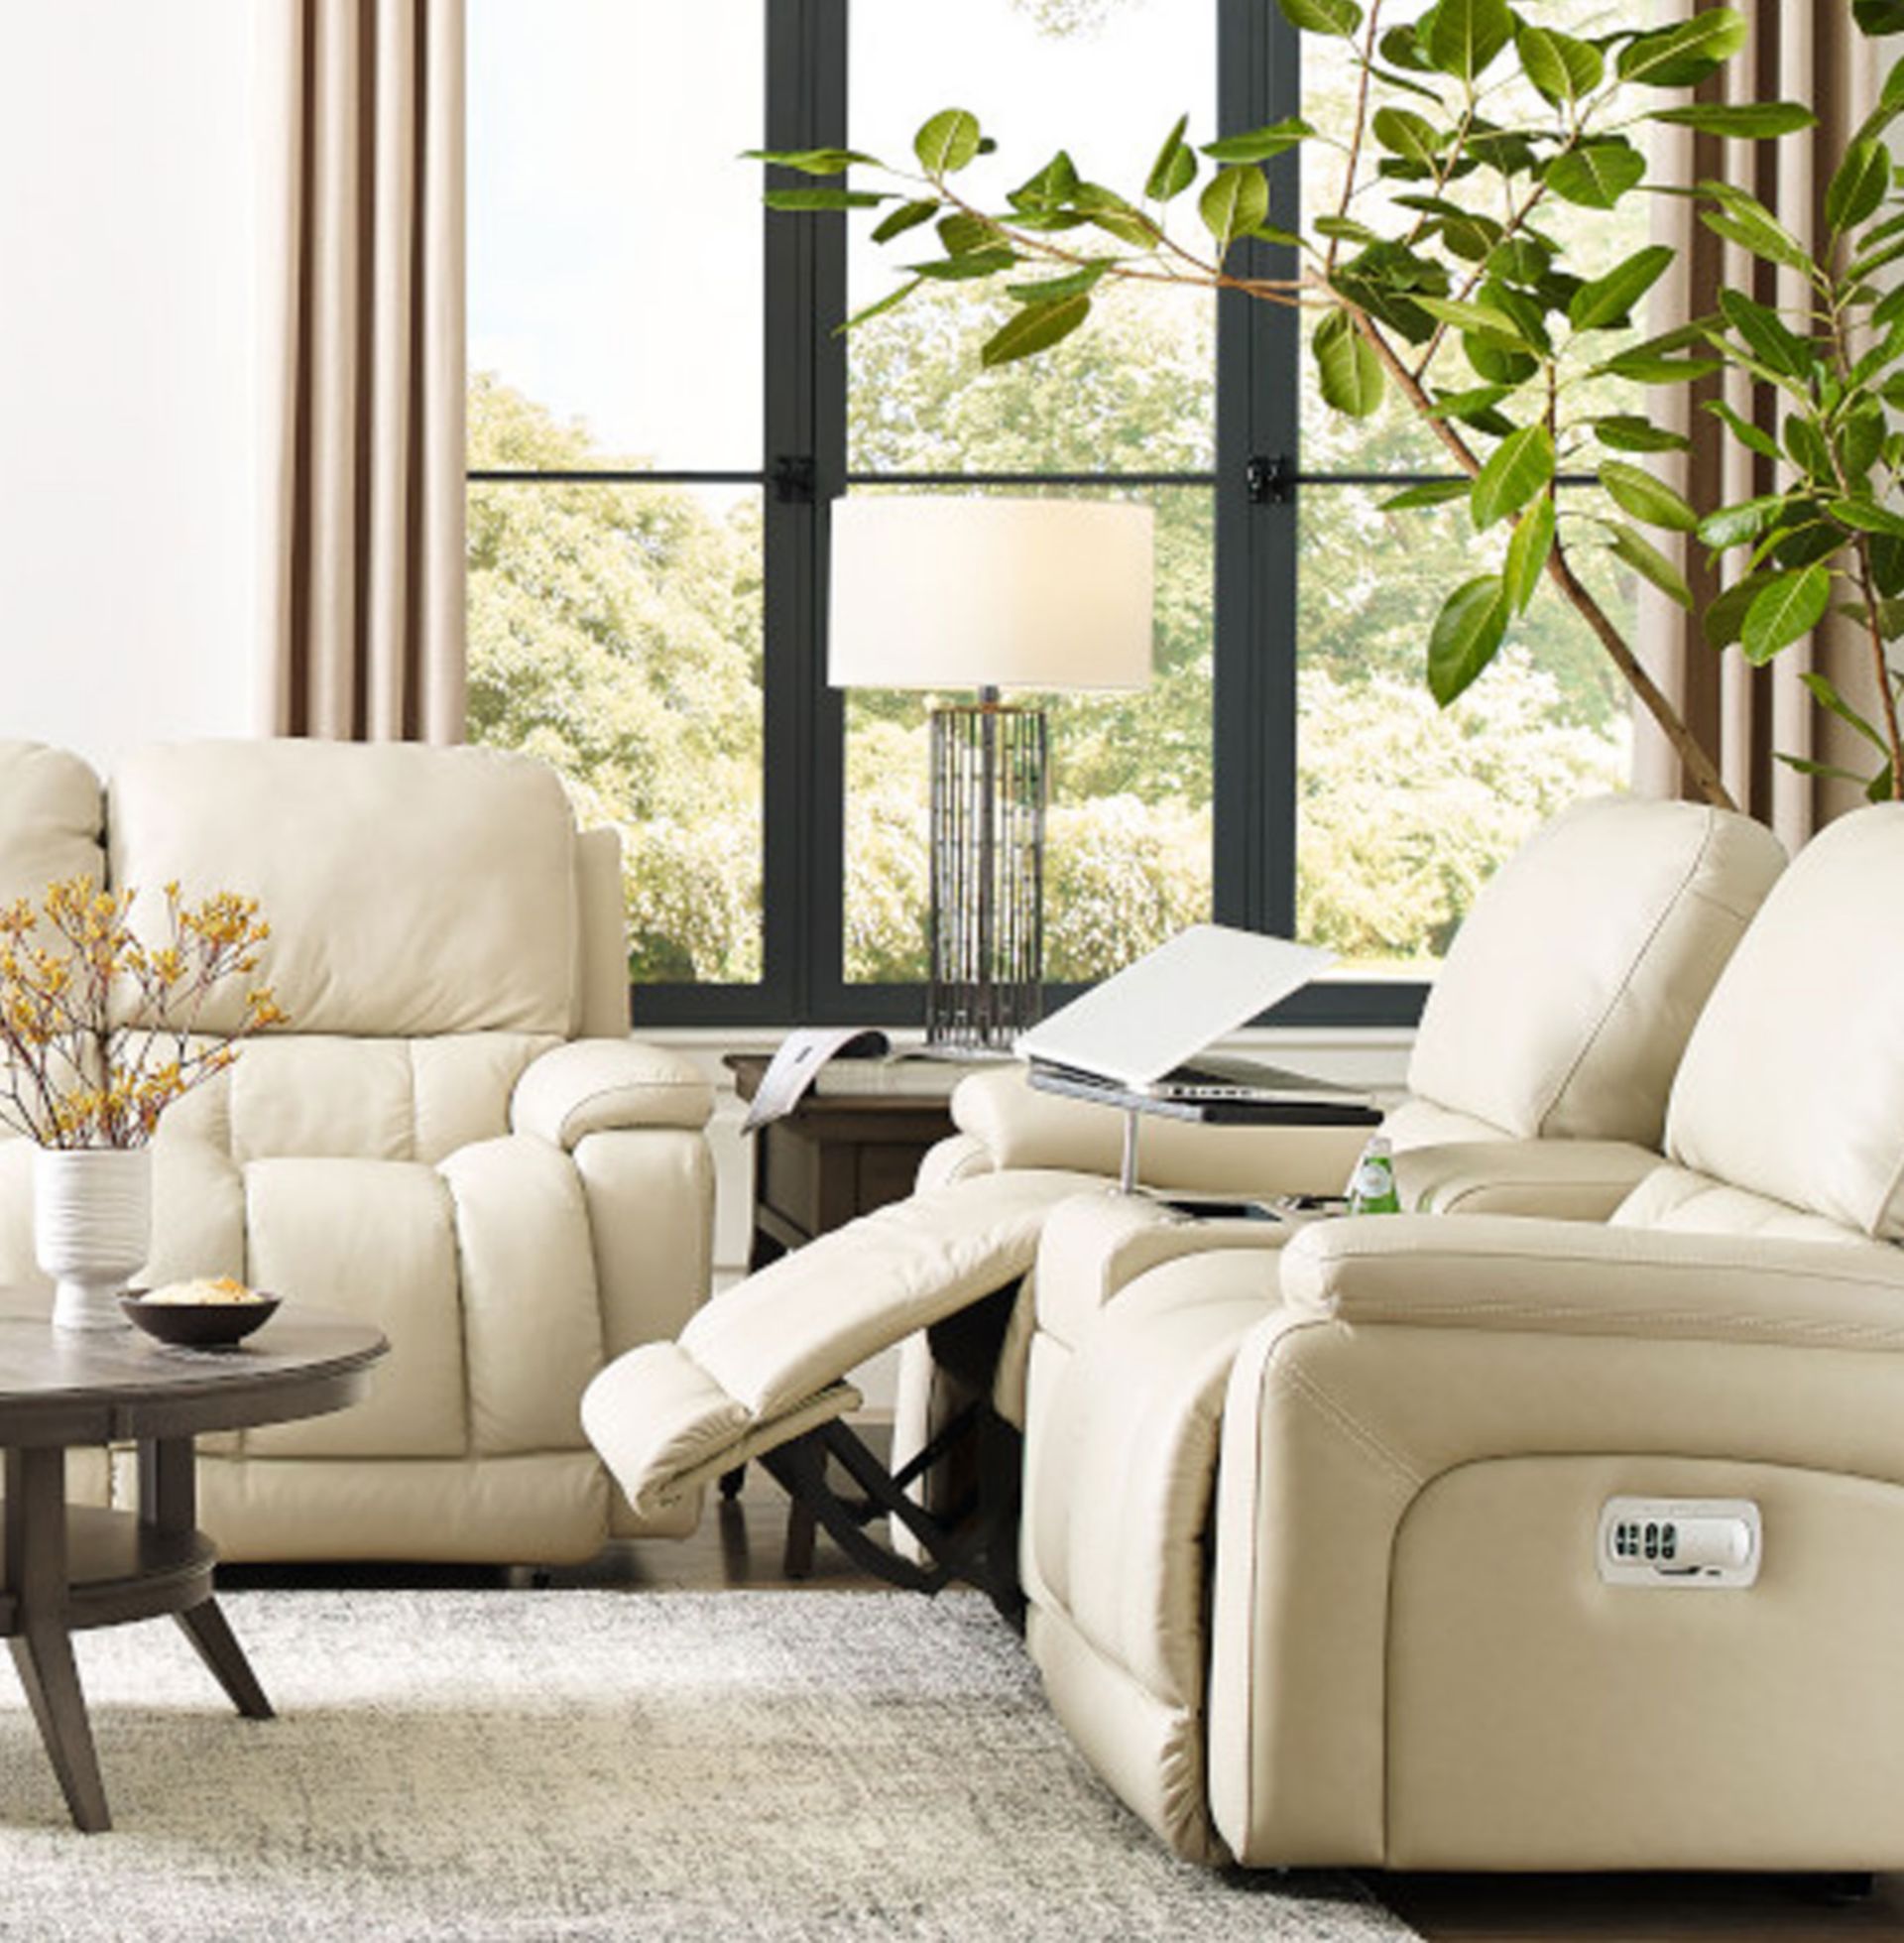 Greyson Cream Colored Leather Sofa Collection